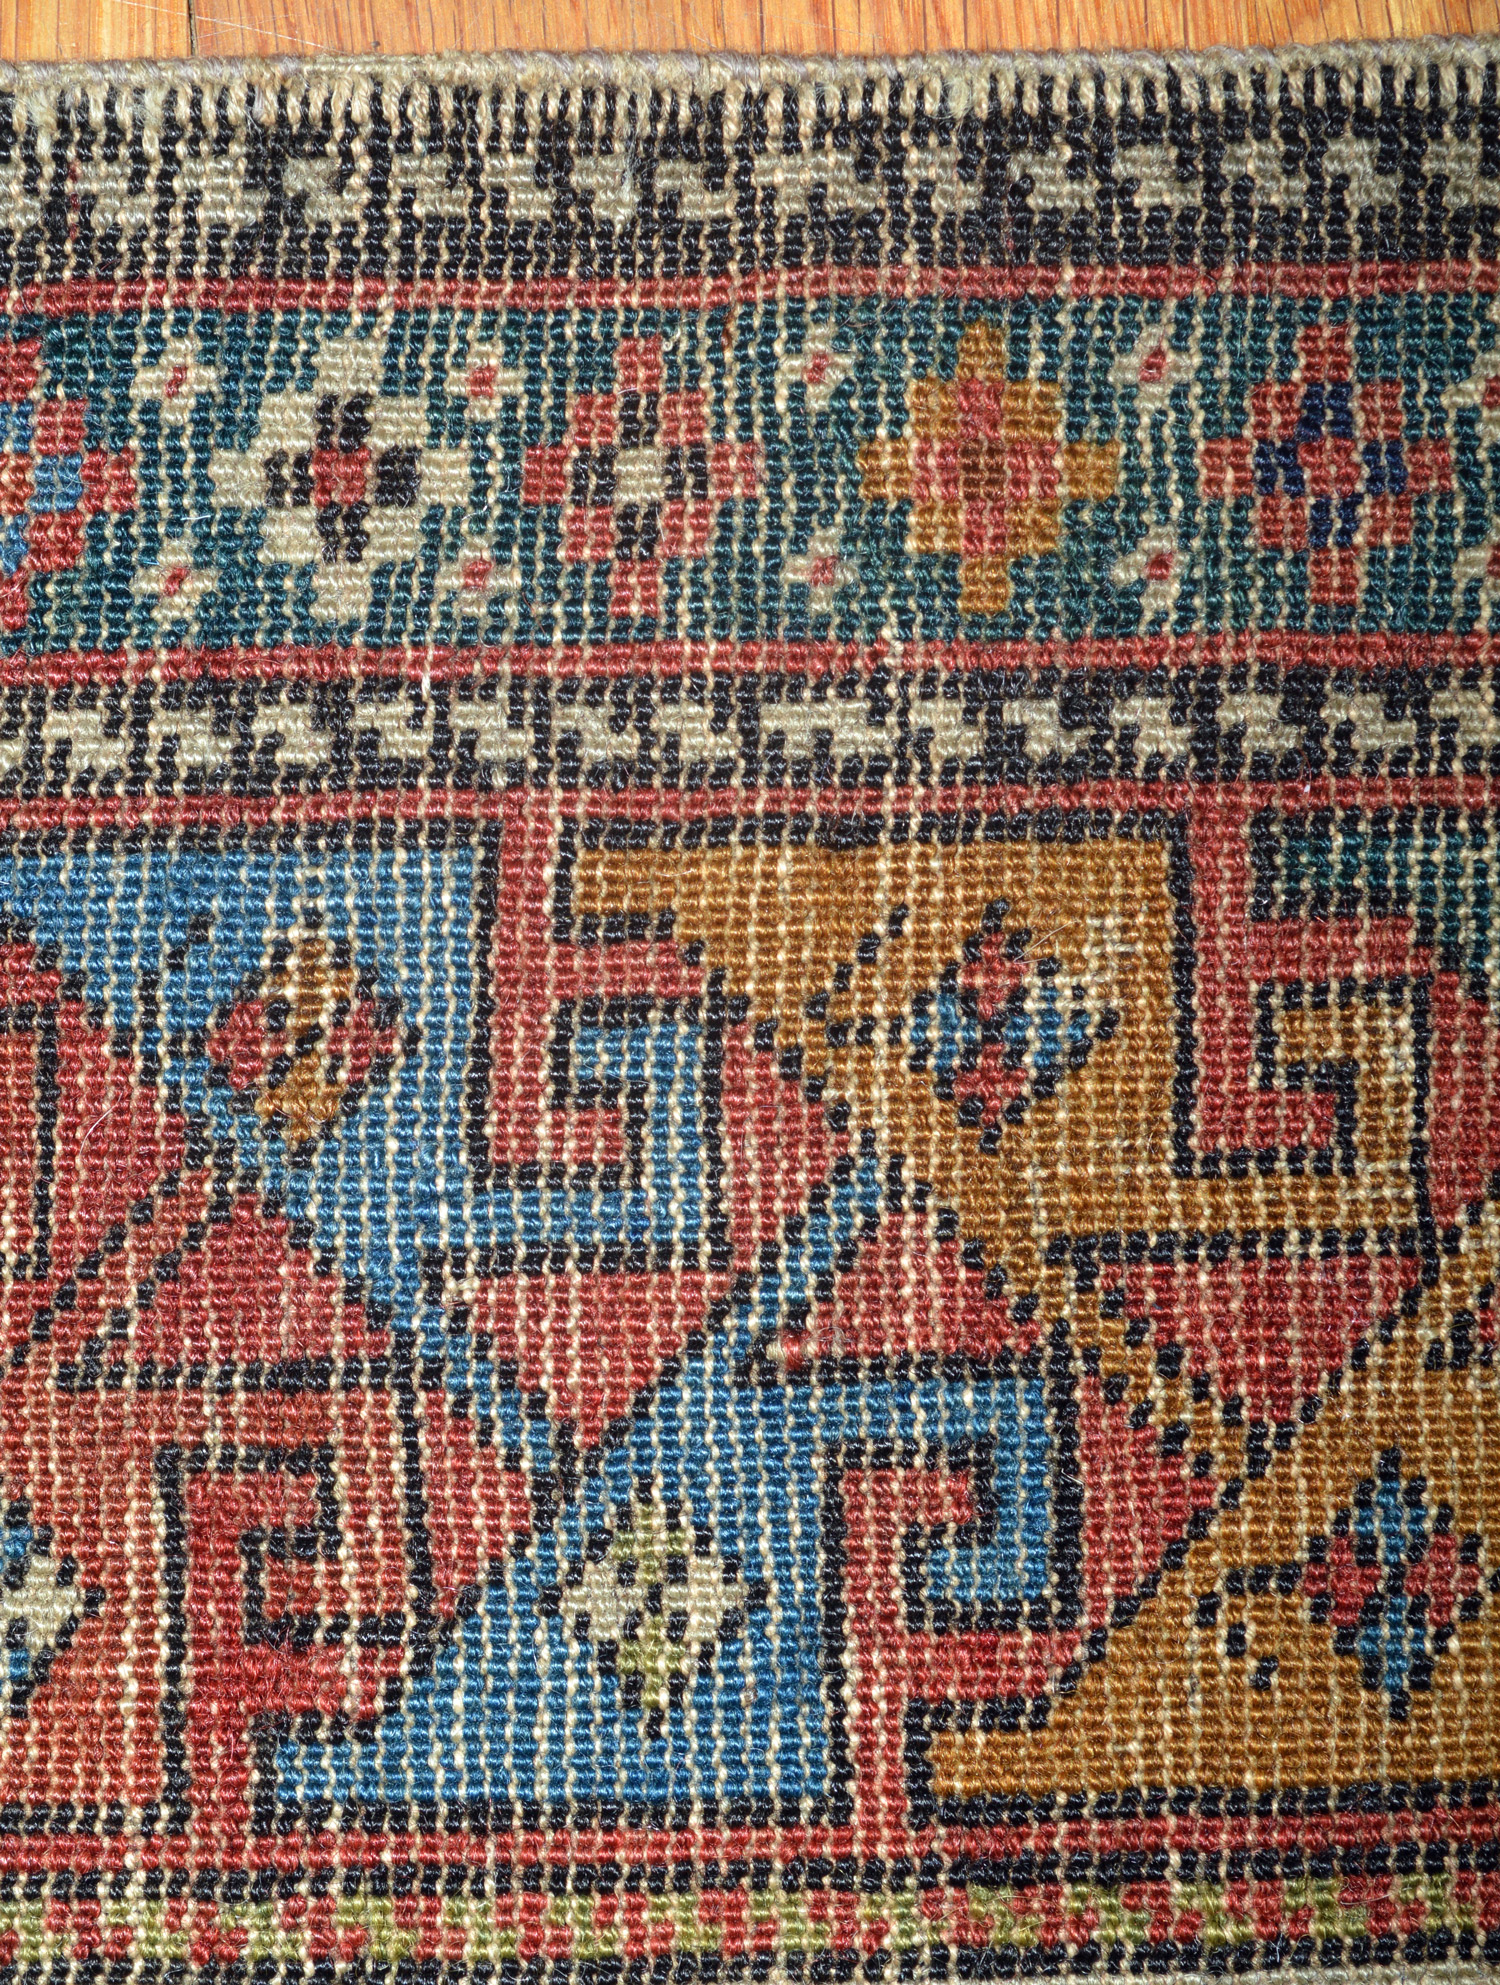 Weave and selvedge detail from an antique Caucasian Shirvan rug - Douglas Stock Gallery, antique rugs, South Natick/Wellesley, MA area